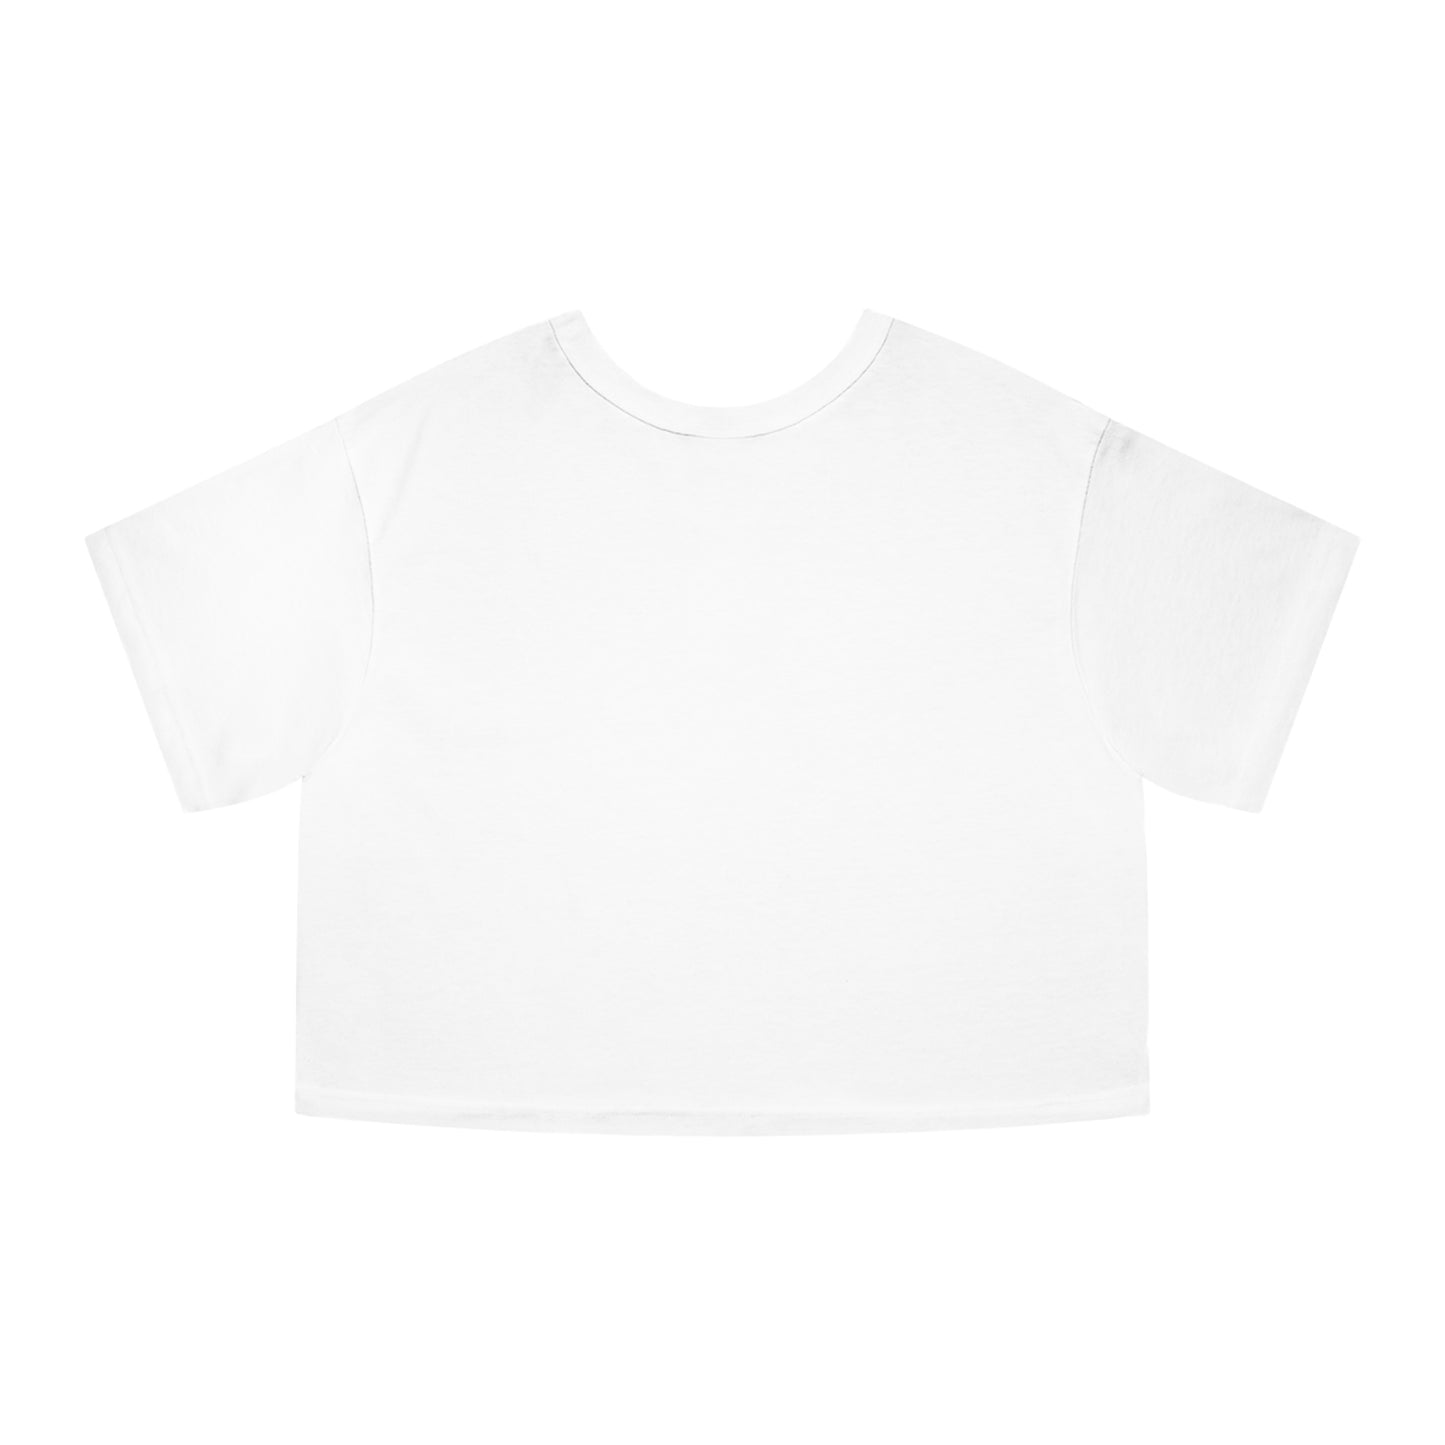 The Definition of Community Cropped T-Shirt